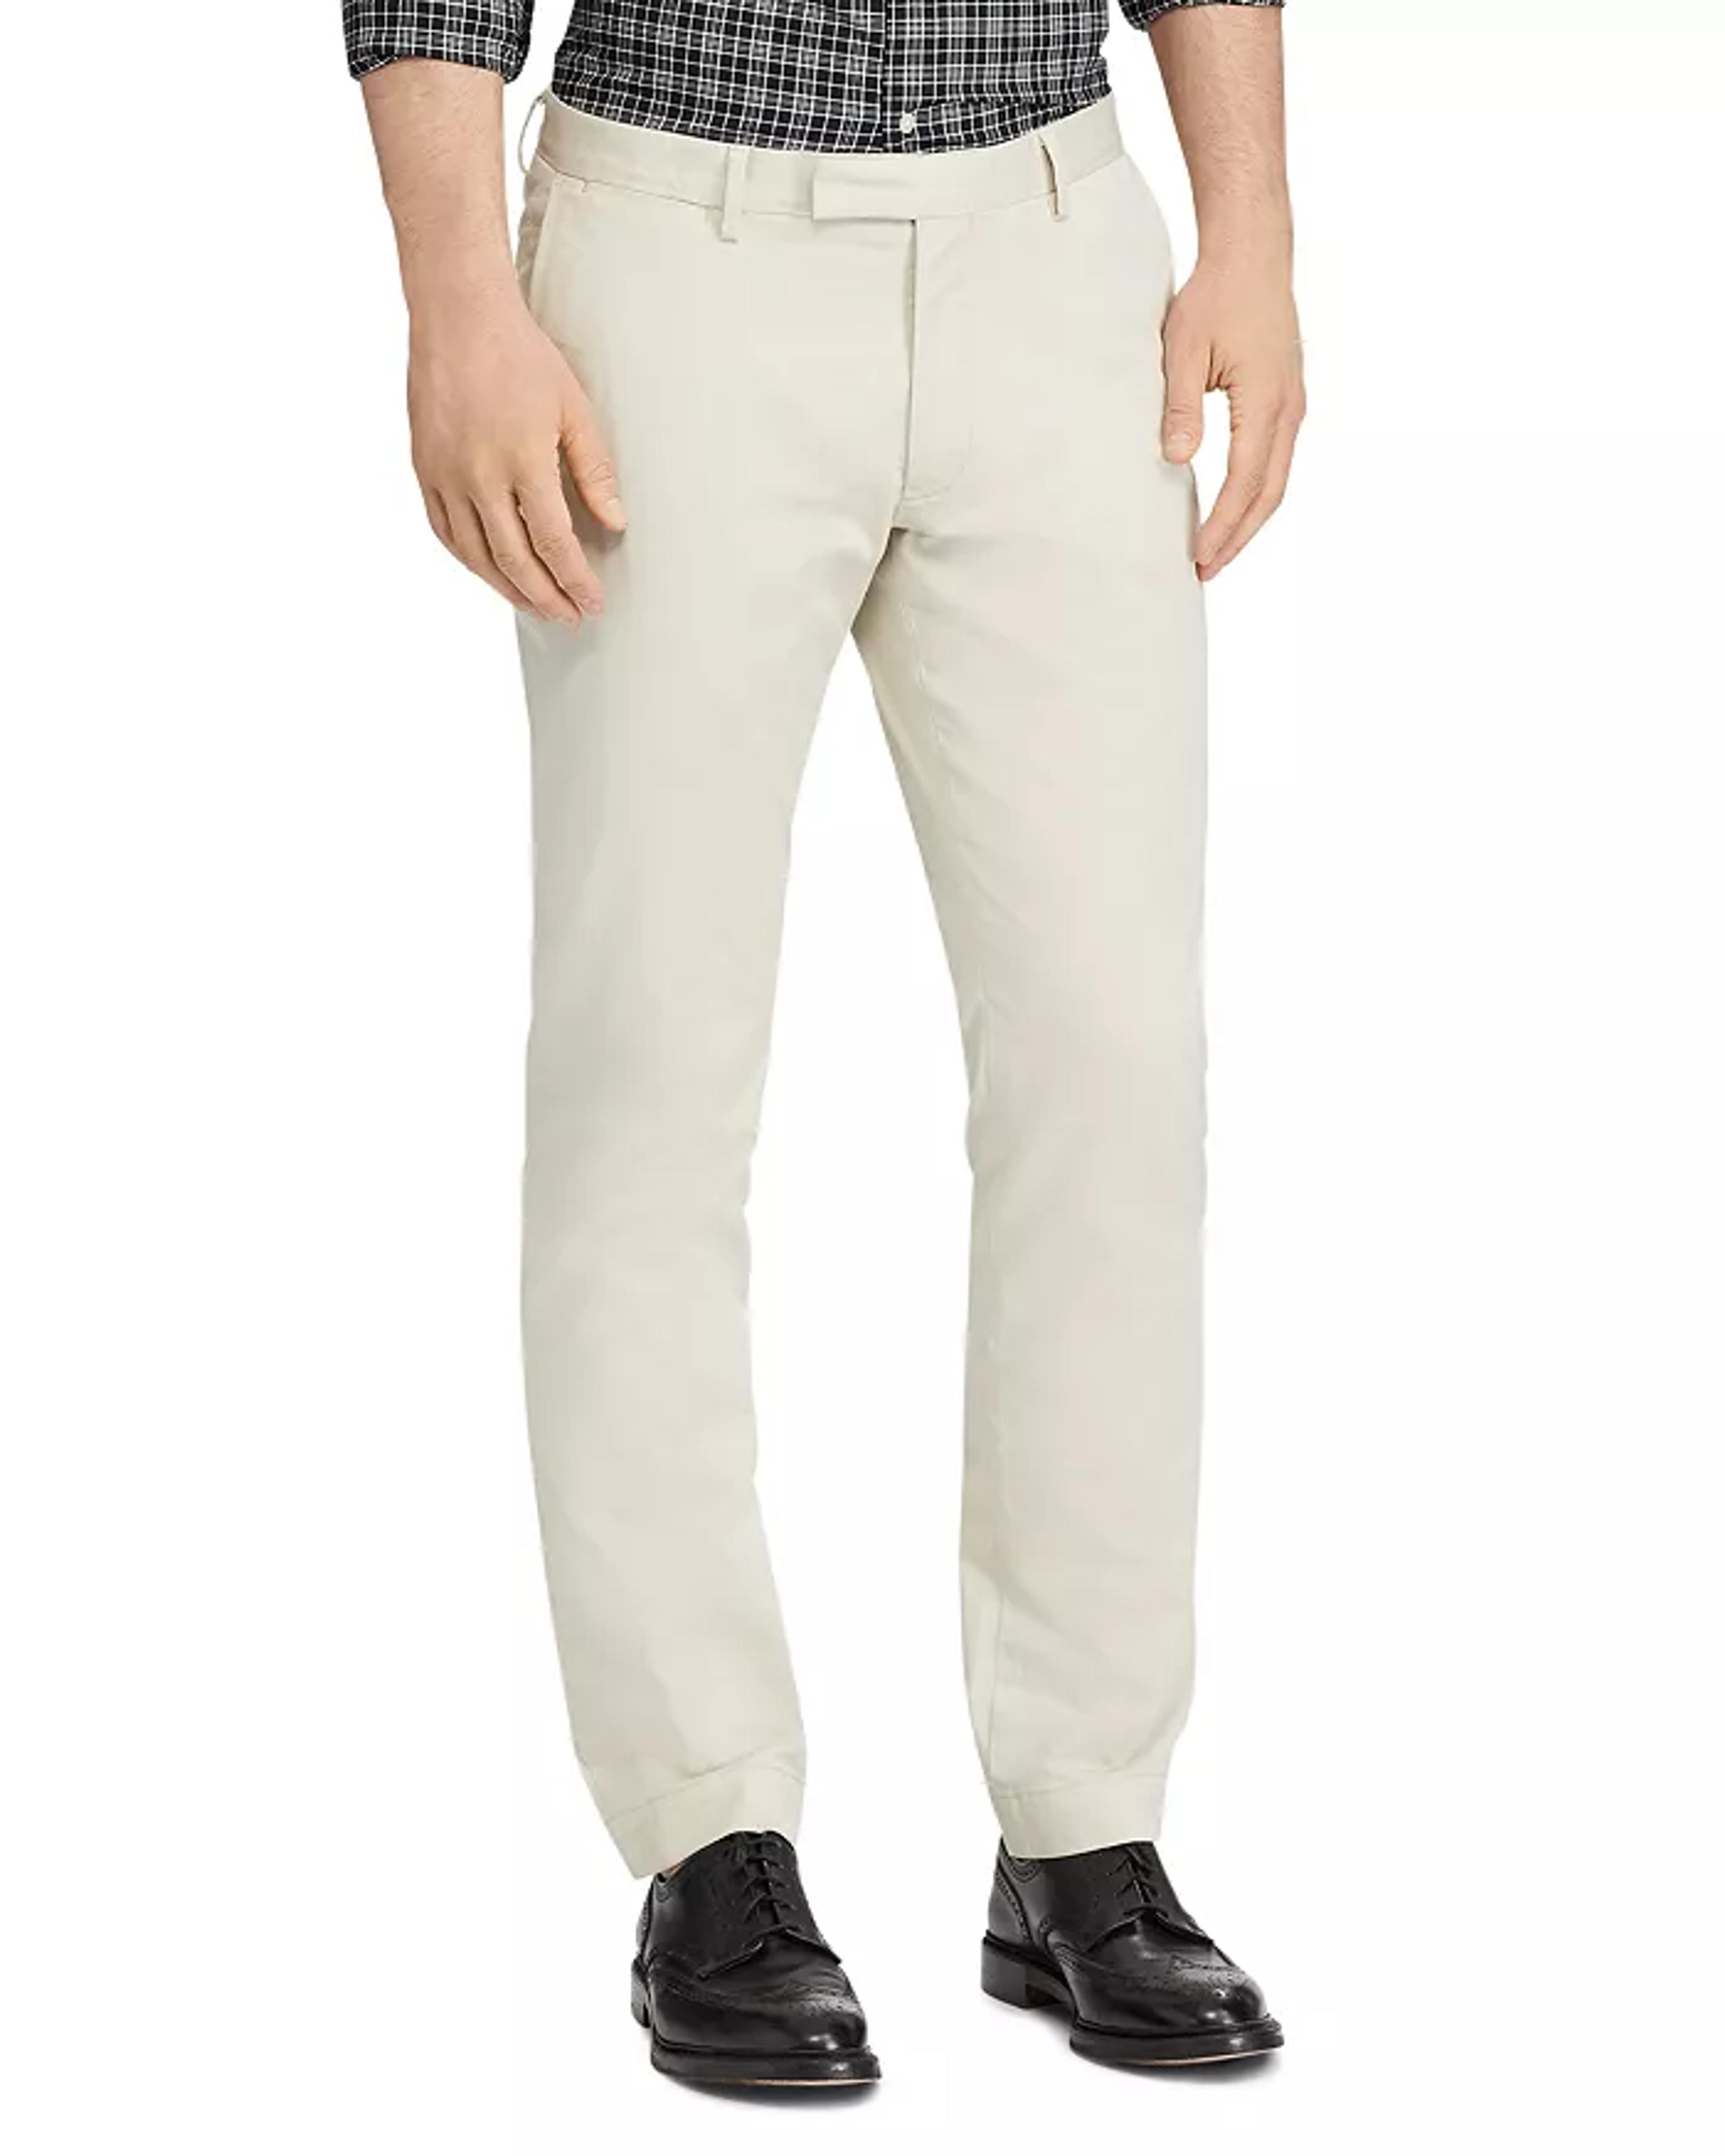 Polo Ralph Lauren Stretch Chino Pant - Slim & Straight Fits | Bloomingdale's